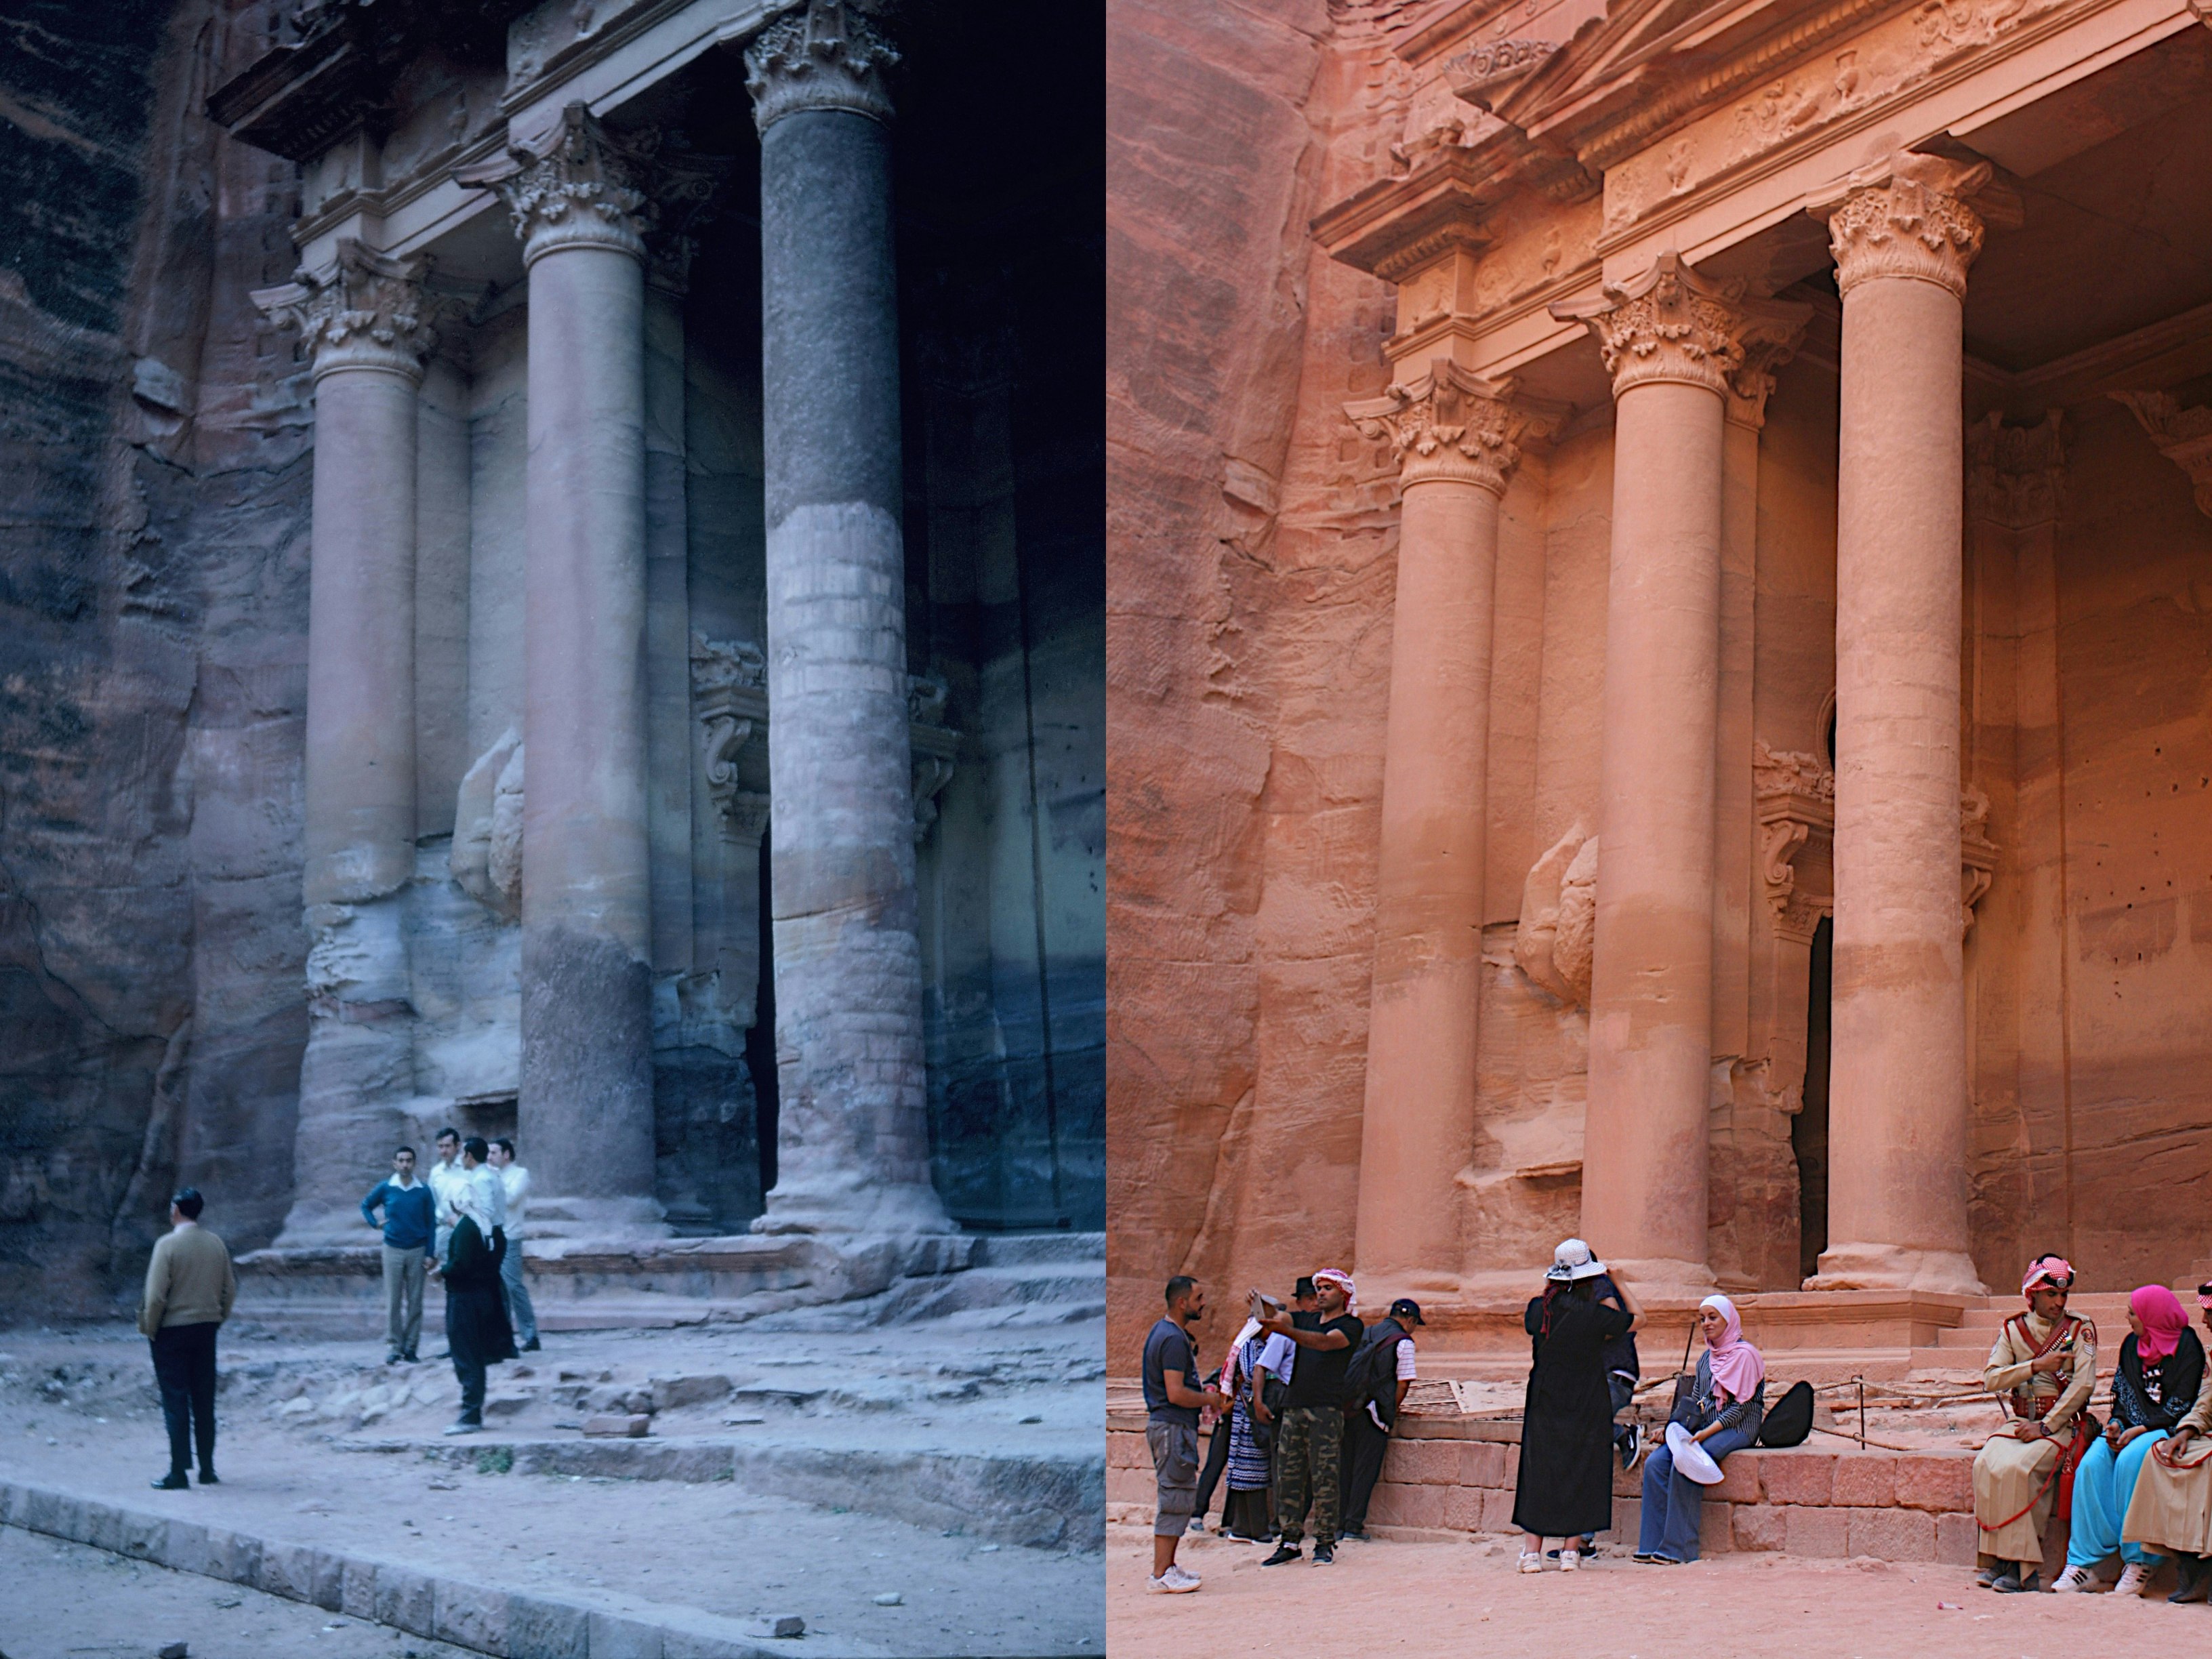 On the left is a very old, greyish photo of men standing beneath the stone columns of the Treasury in Petra; on the right is a very colourful image of the same scene - the stone is reddish, and people are sitting on the edge of the Treasury taking photos and chatting with Royal Bedouin Police.